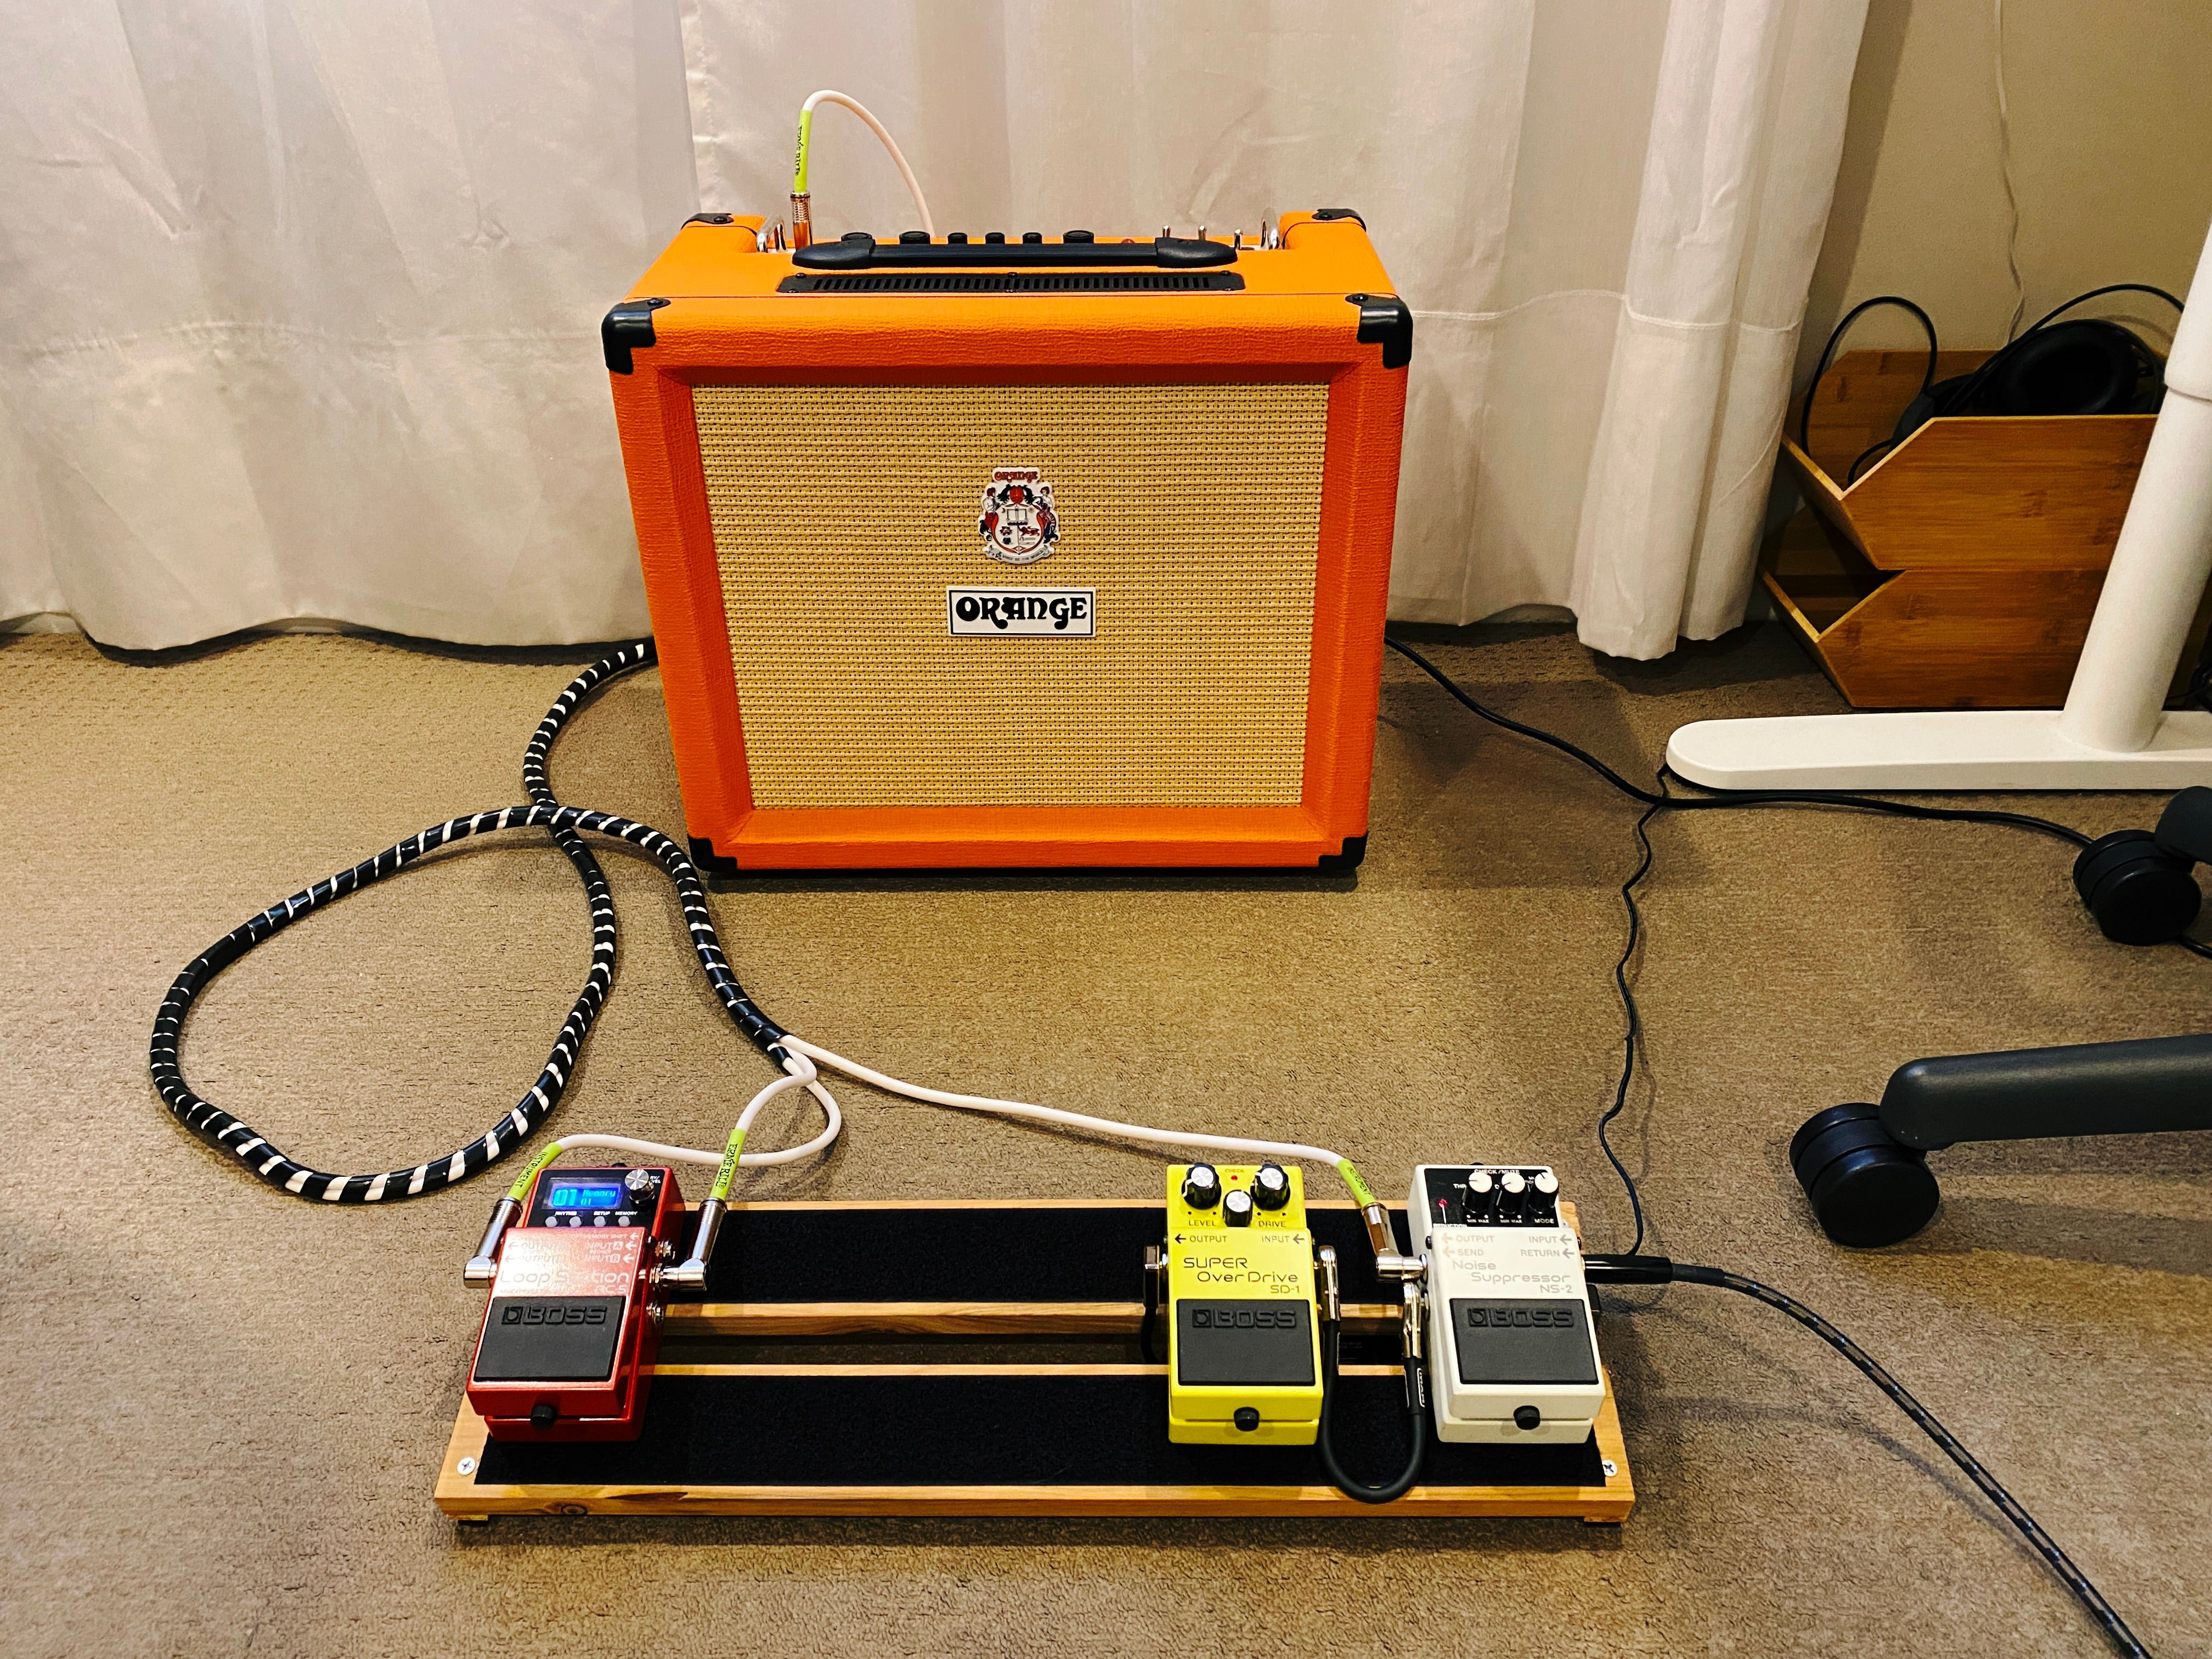 A photo of the pedalboard sitting in front of an Orange (and coloured orange) guitar amplifier.